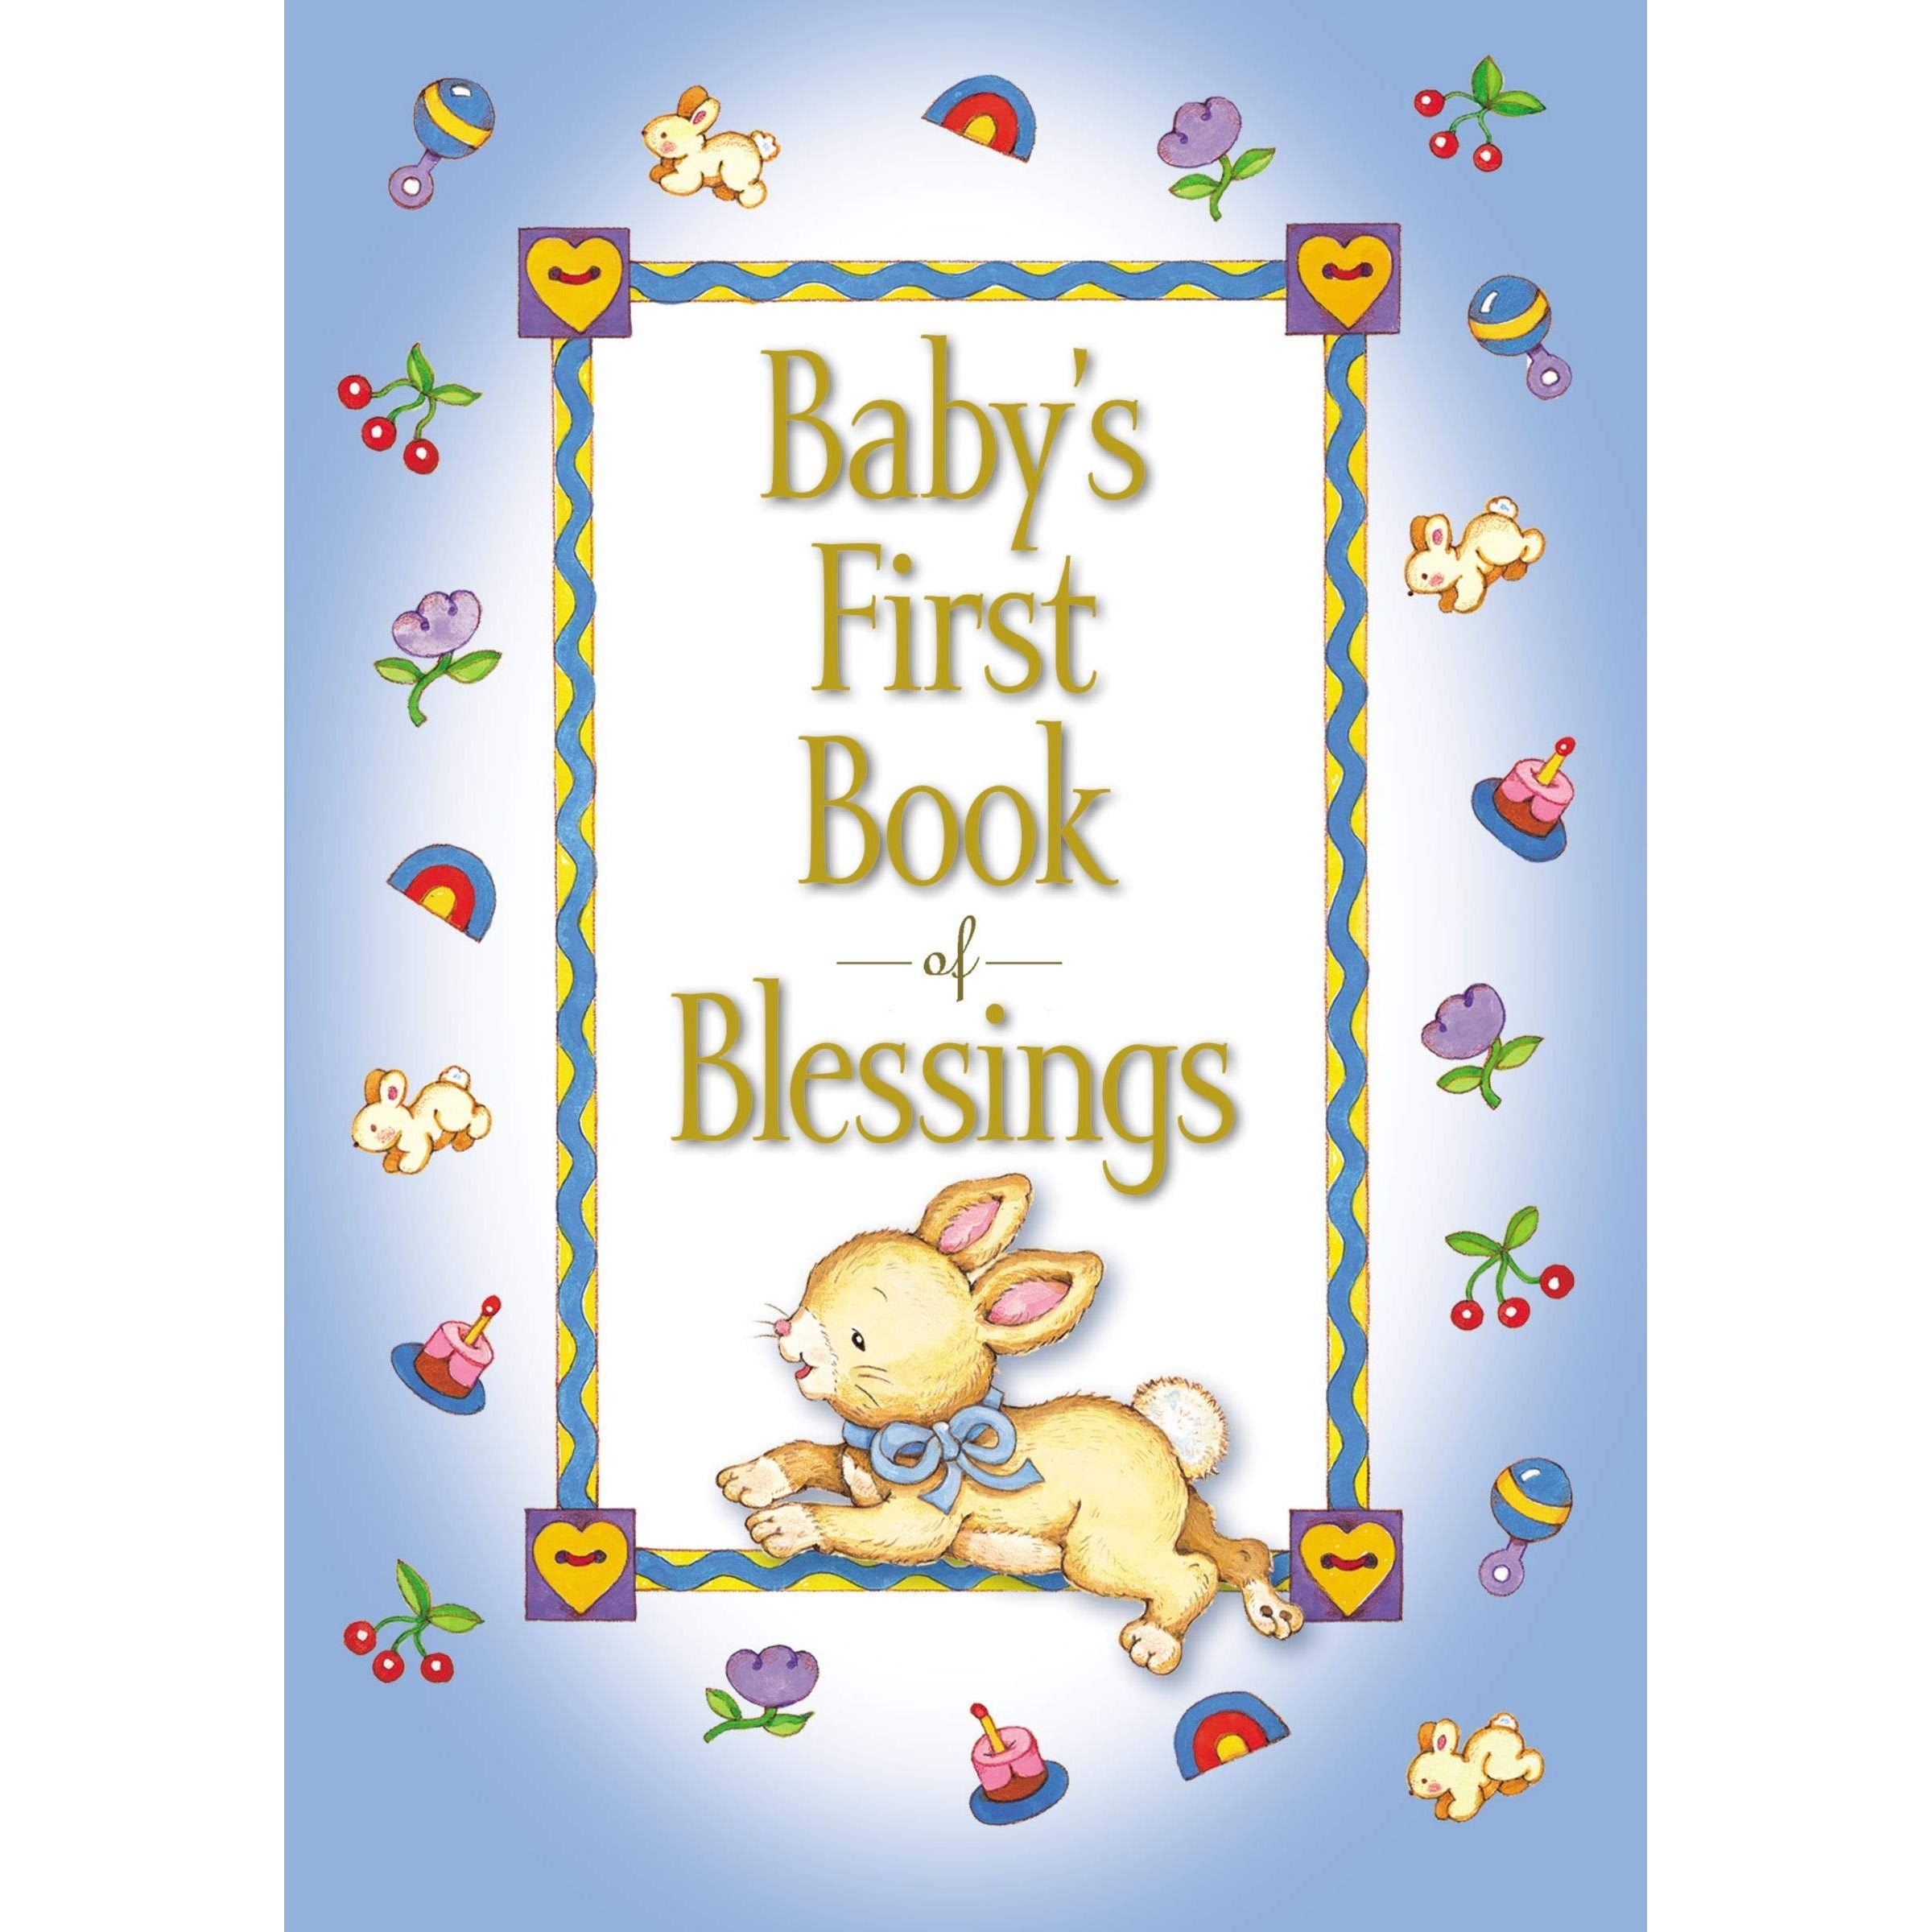 Zonder Kidz: Baby's First Book of Blessings - Blue (Hardcover Book)-HARPER COLLINS PUBLISHERS-Little Giant Kidz